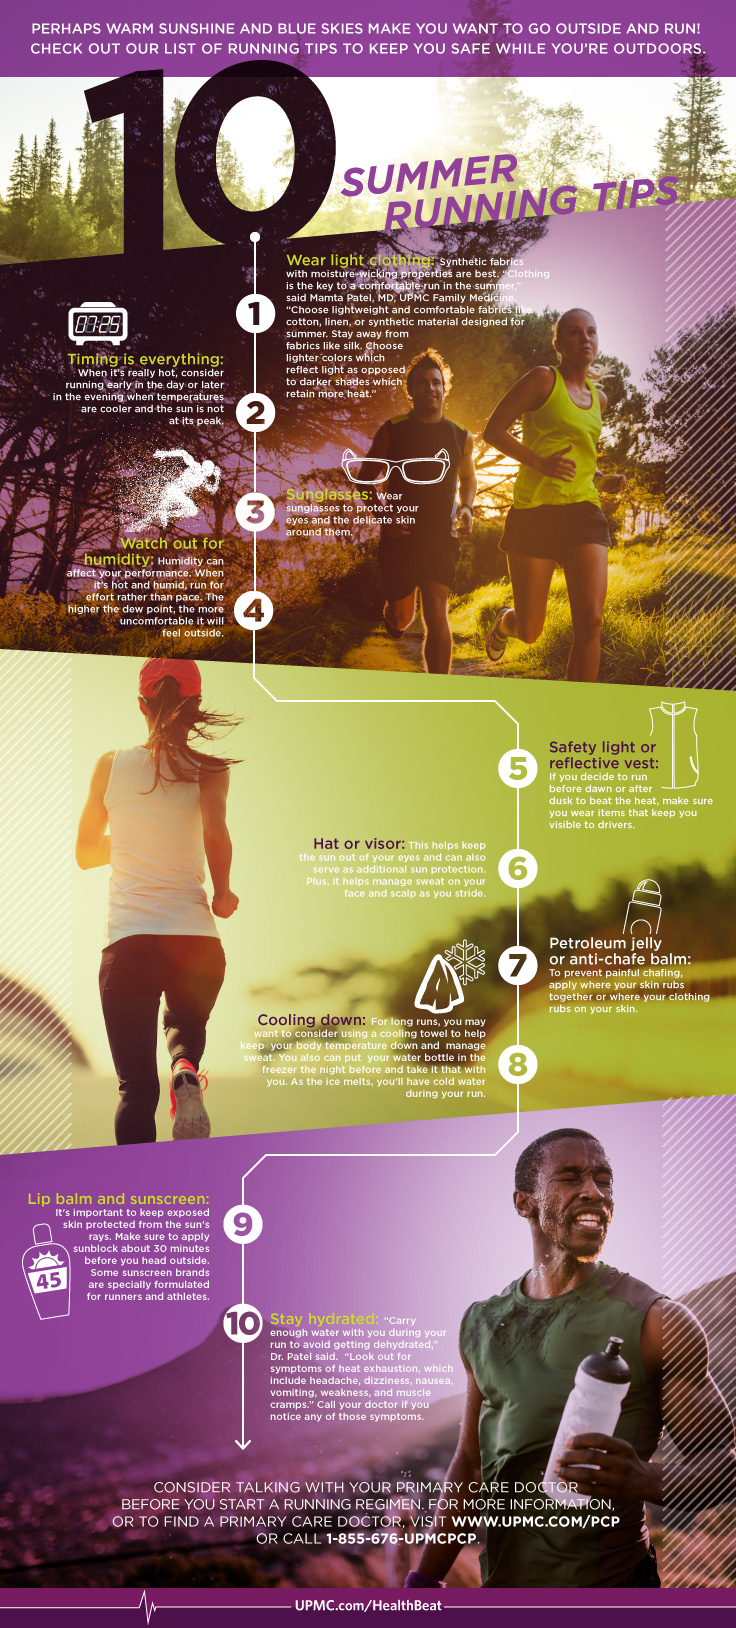 Learn more about summer running safety tips